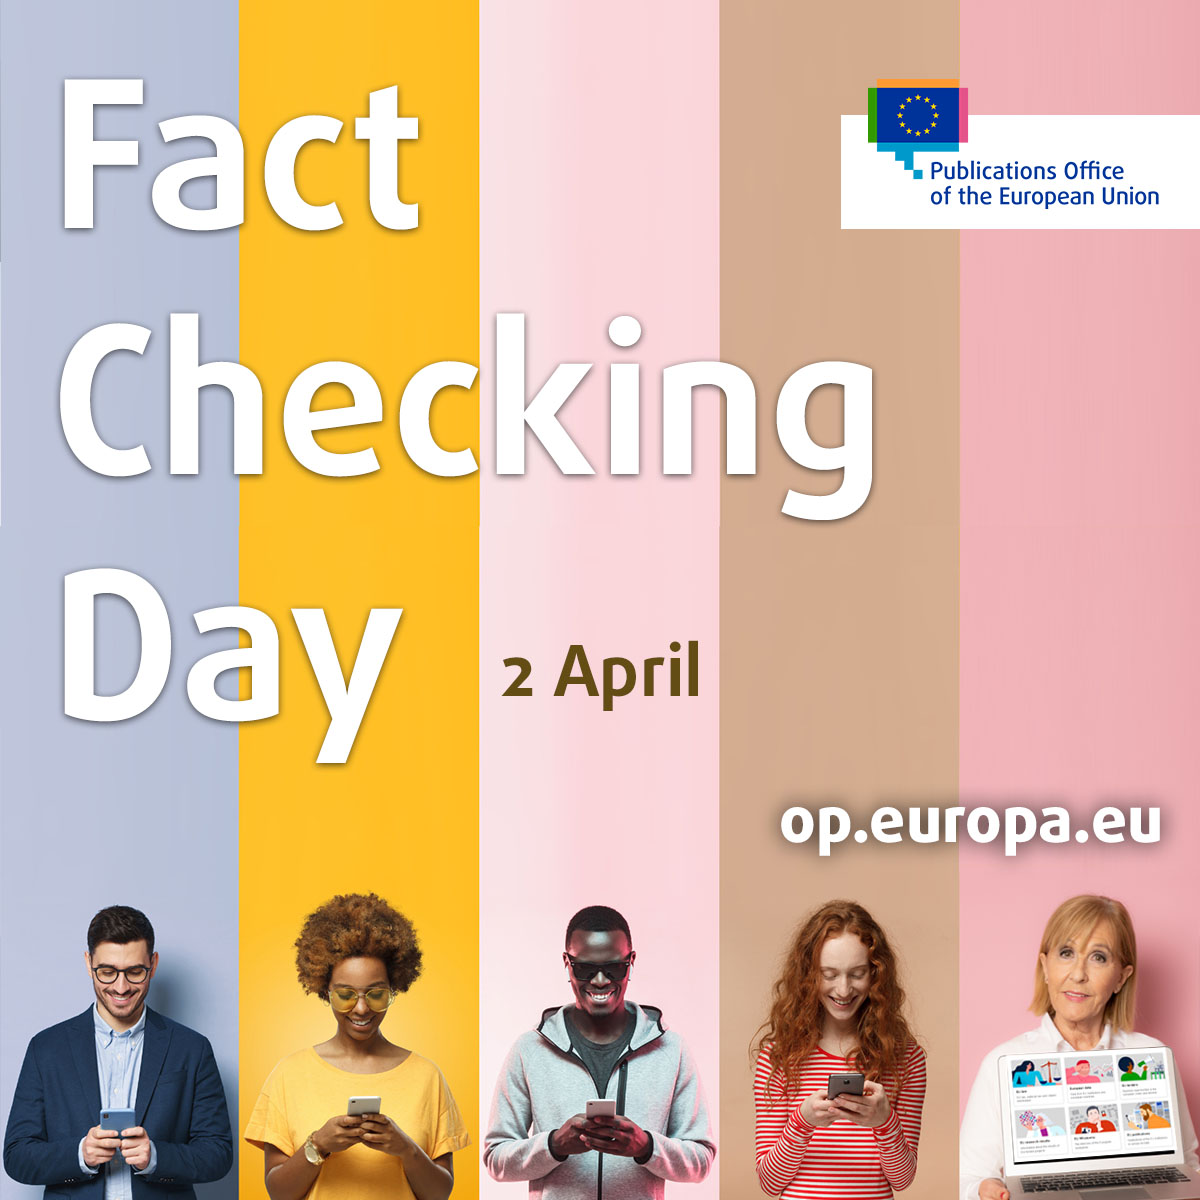 At @EULawDataPubs, we help to make known what the EU does and means. We do this by making authentic EU information accessible for all. Wishing you a factful #FactCheckingDay today and beyond! Follow @EURLex, @EUPublications, @EU_opendata, @CORDIS_EU & @EUTenders! @JHahnEU